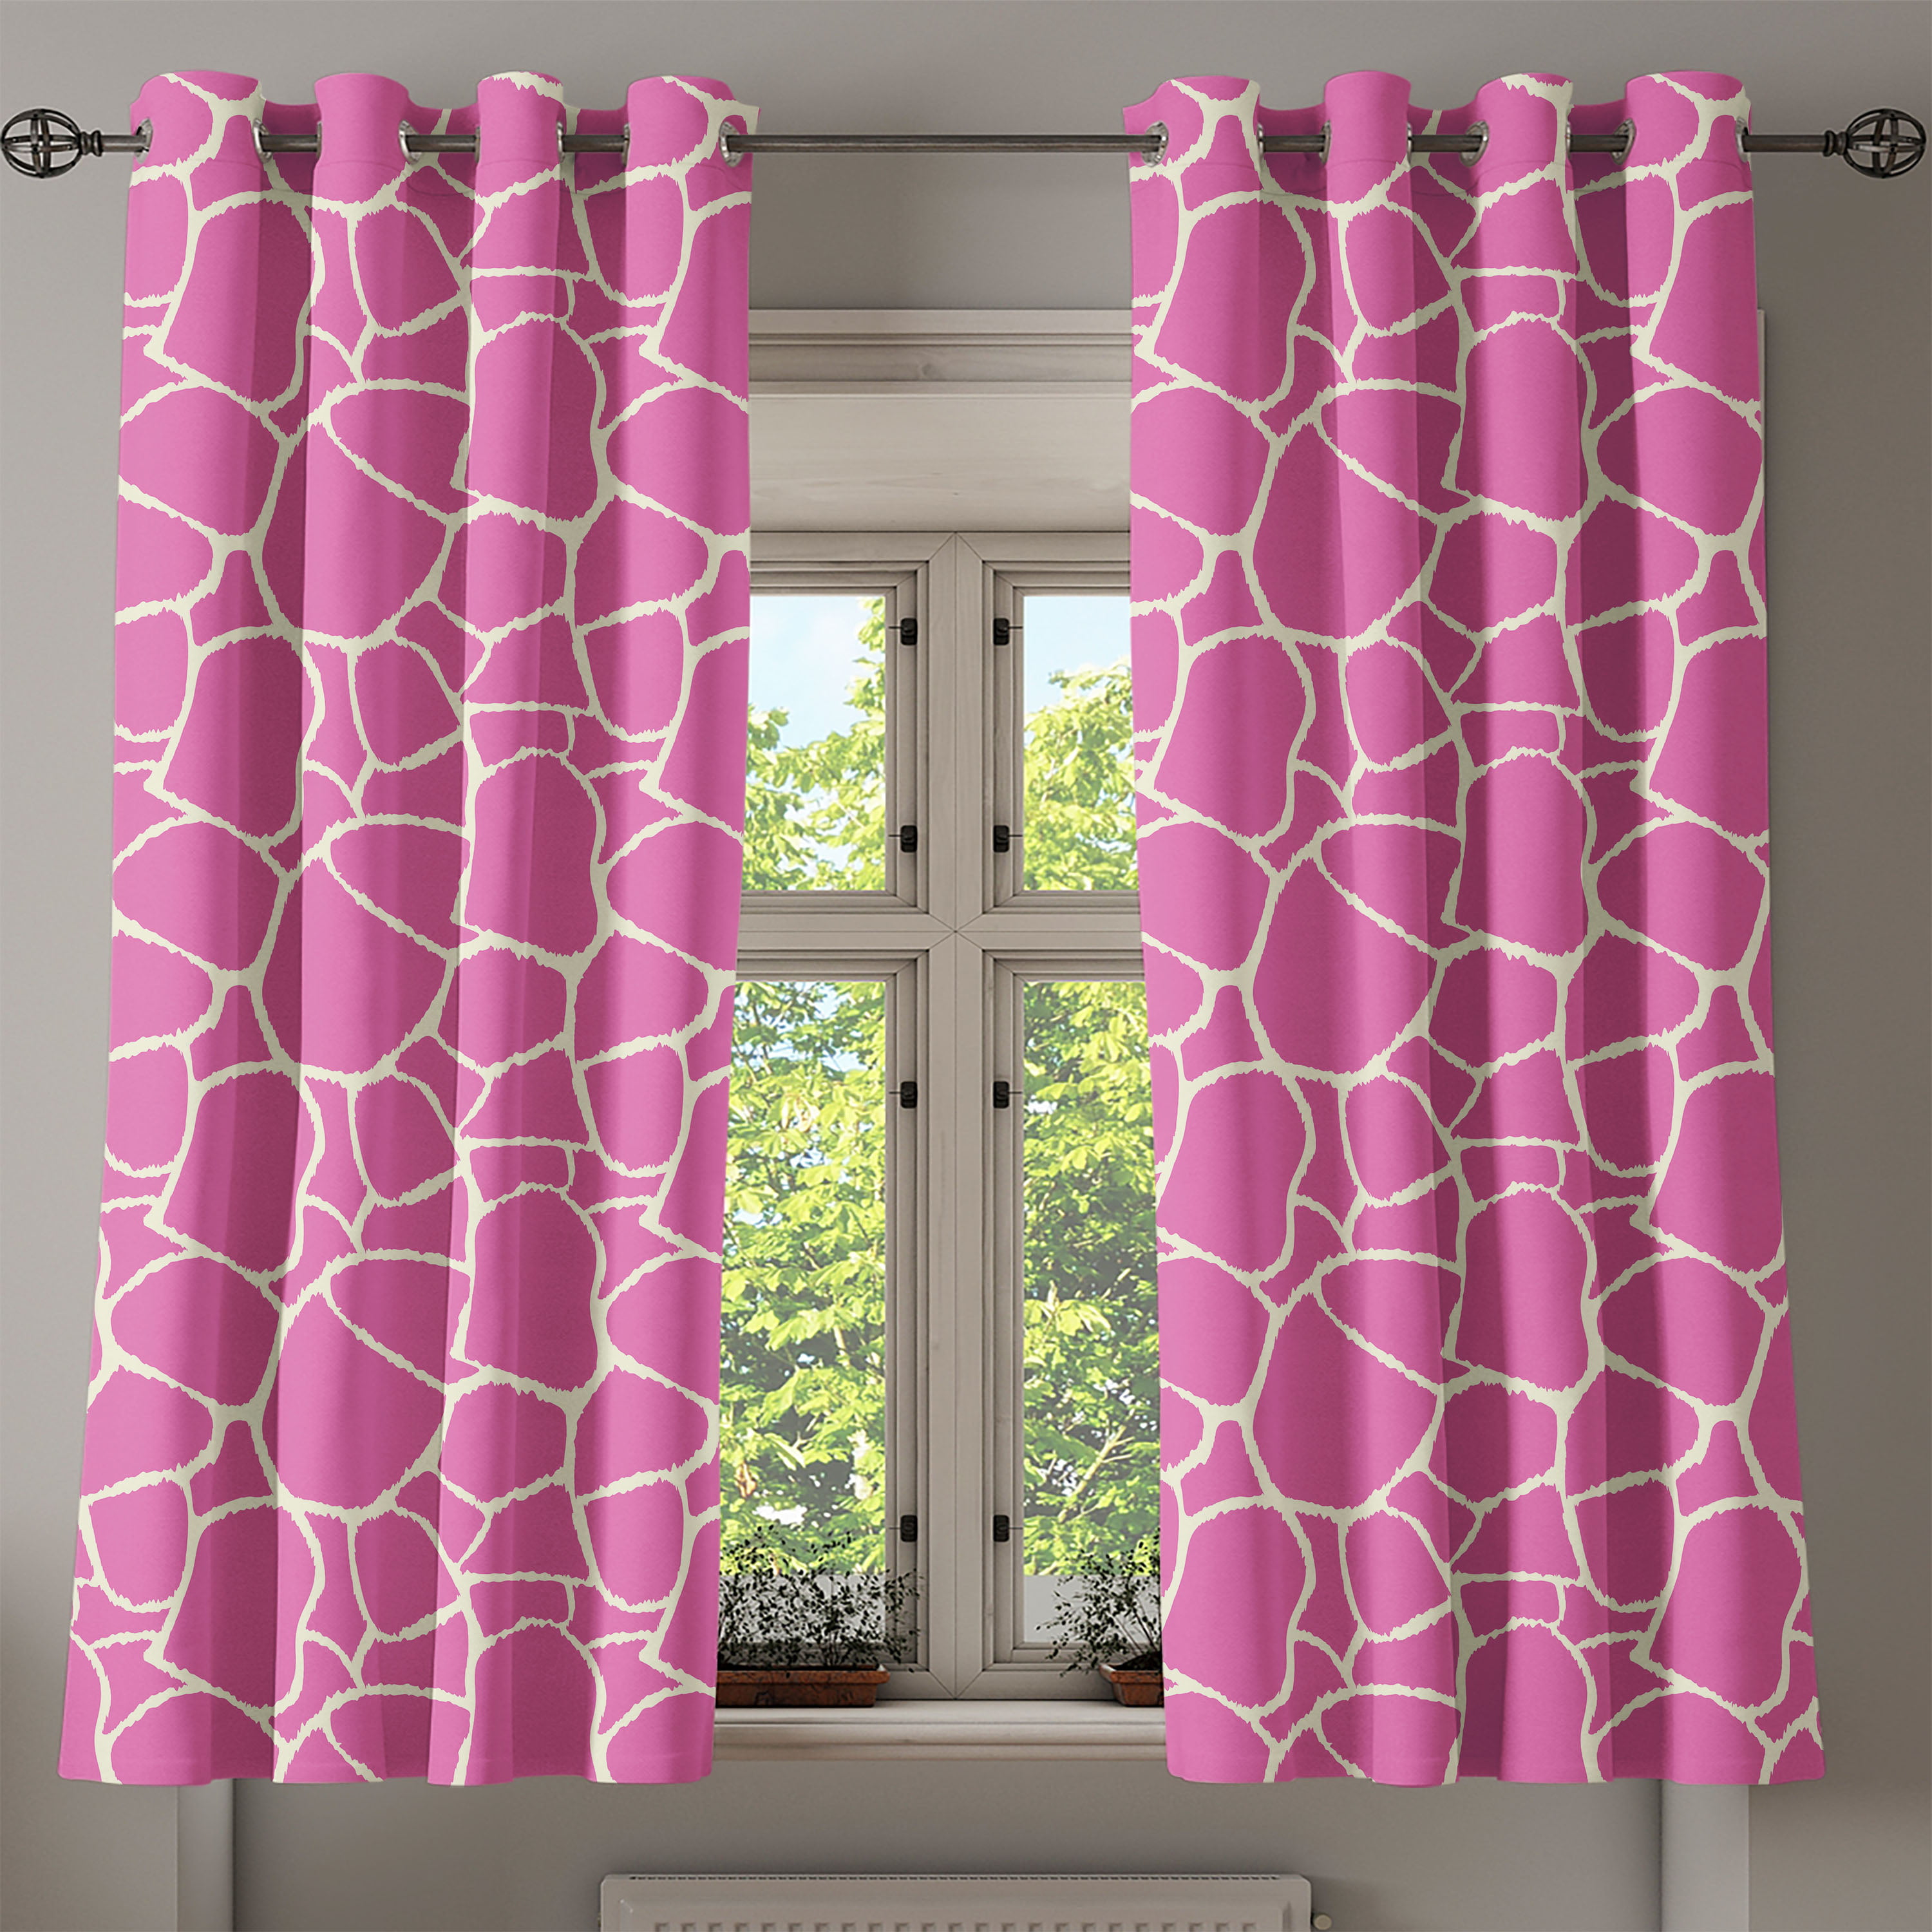 Giraffe Grommet Curtain, Abstract Tropical Jungle Animal Skin Pattern Pink  Camouflage Style Feminine Design, 2-Panel Window Drapes for Bedroom Living  Room, 50